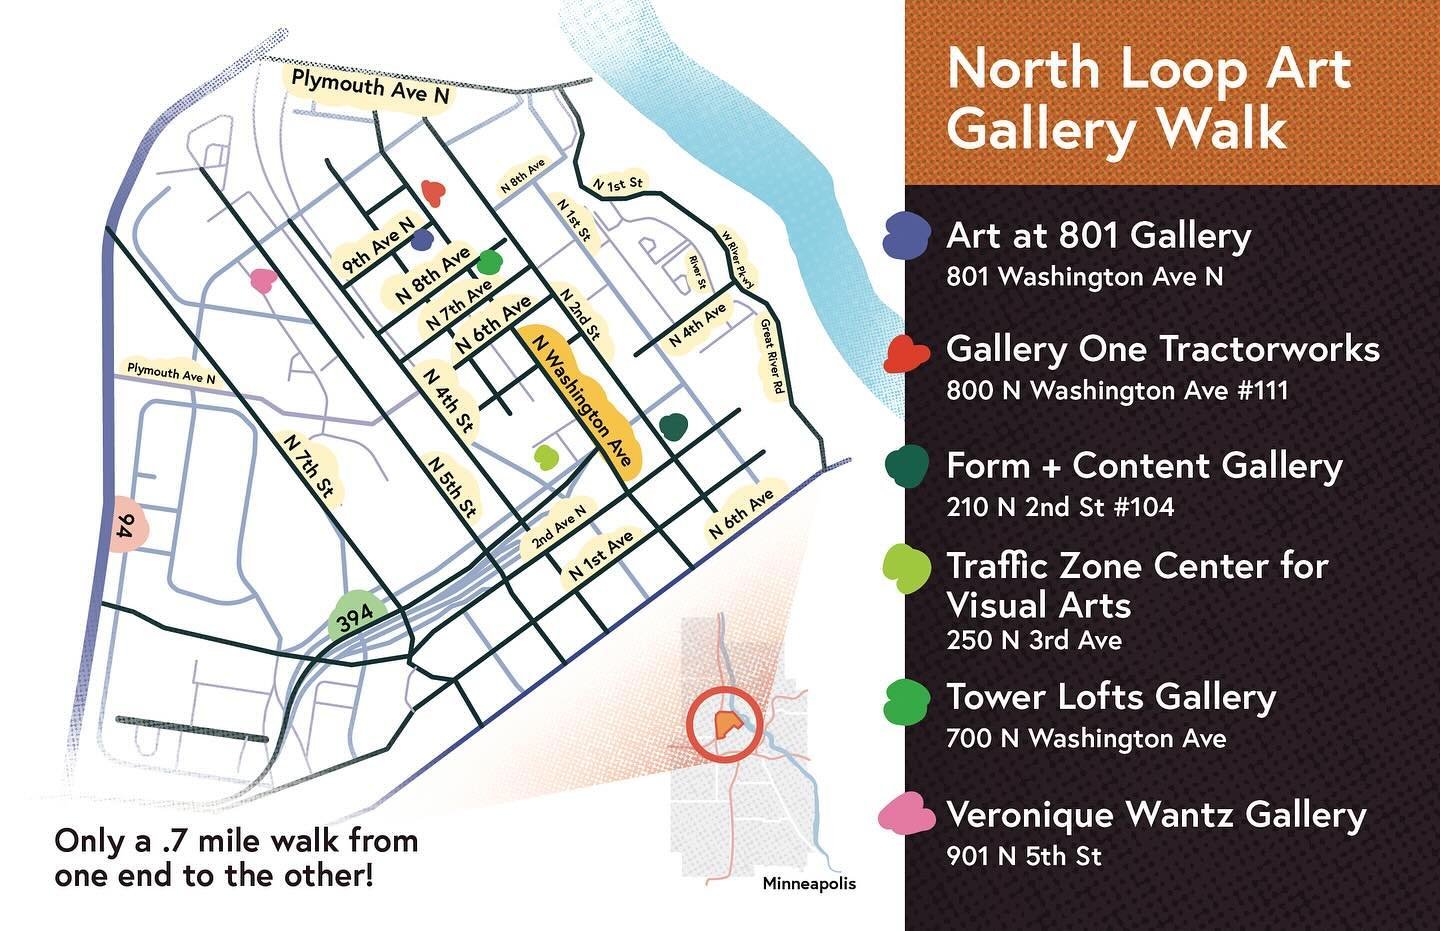 Here&rsquo;s your map for the North Loop Neighborhood Art Walk coming May 11 6-10pm! Six art galleries and all the restaurants, bars, and shops of the North Loop!

Last October, five galleries located in the North Loop neighborhood hosted the first e